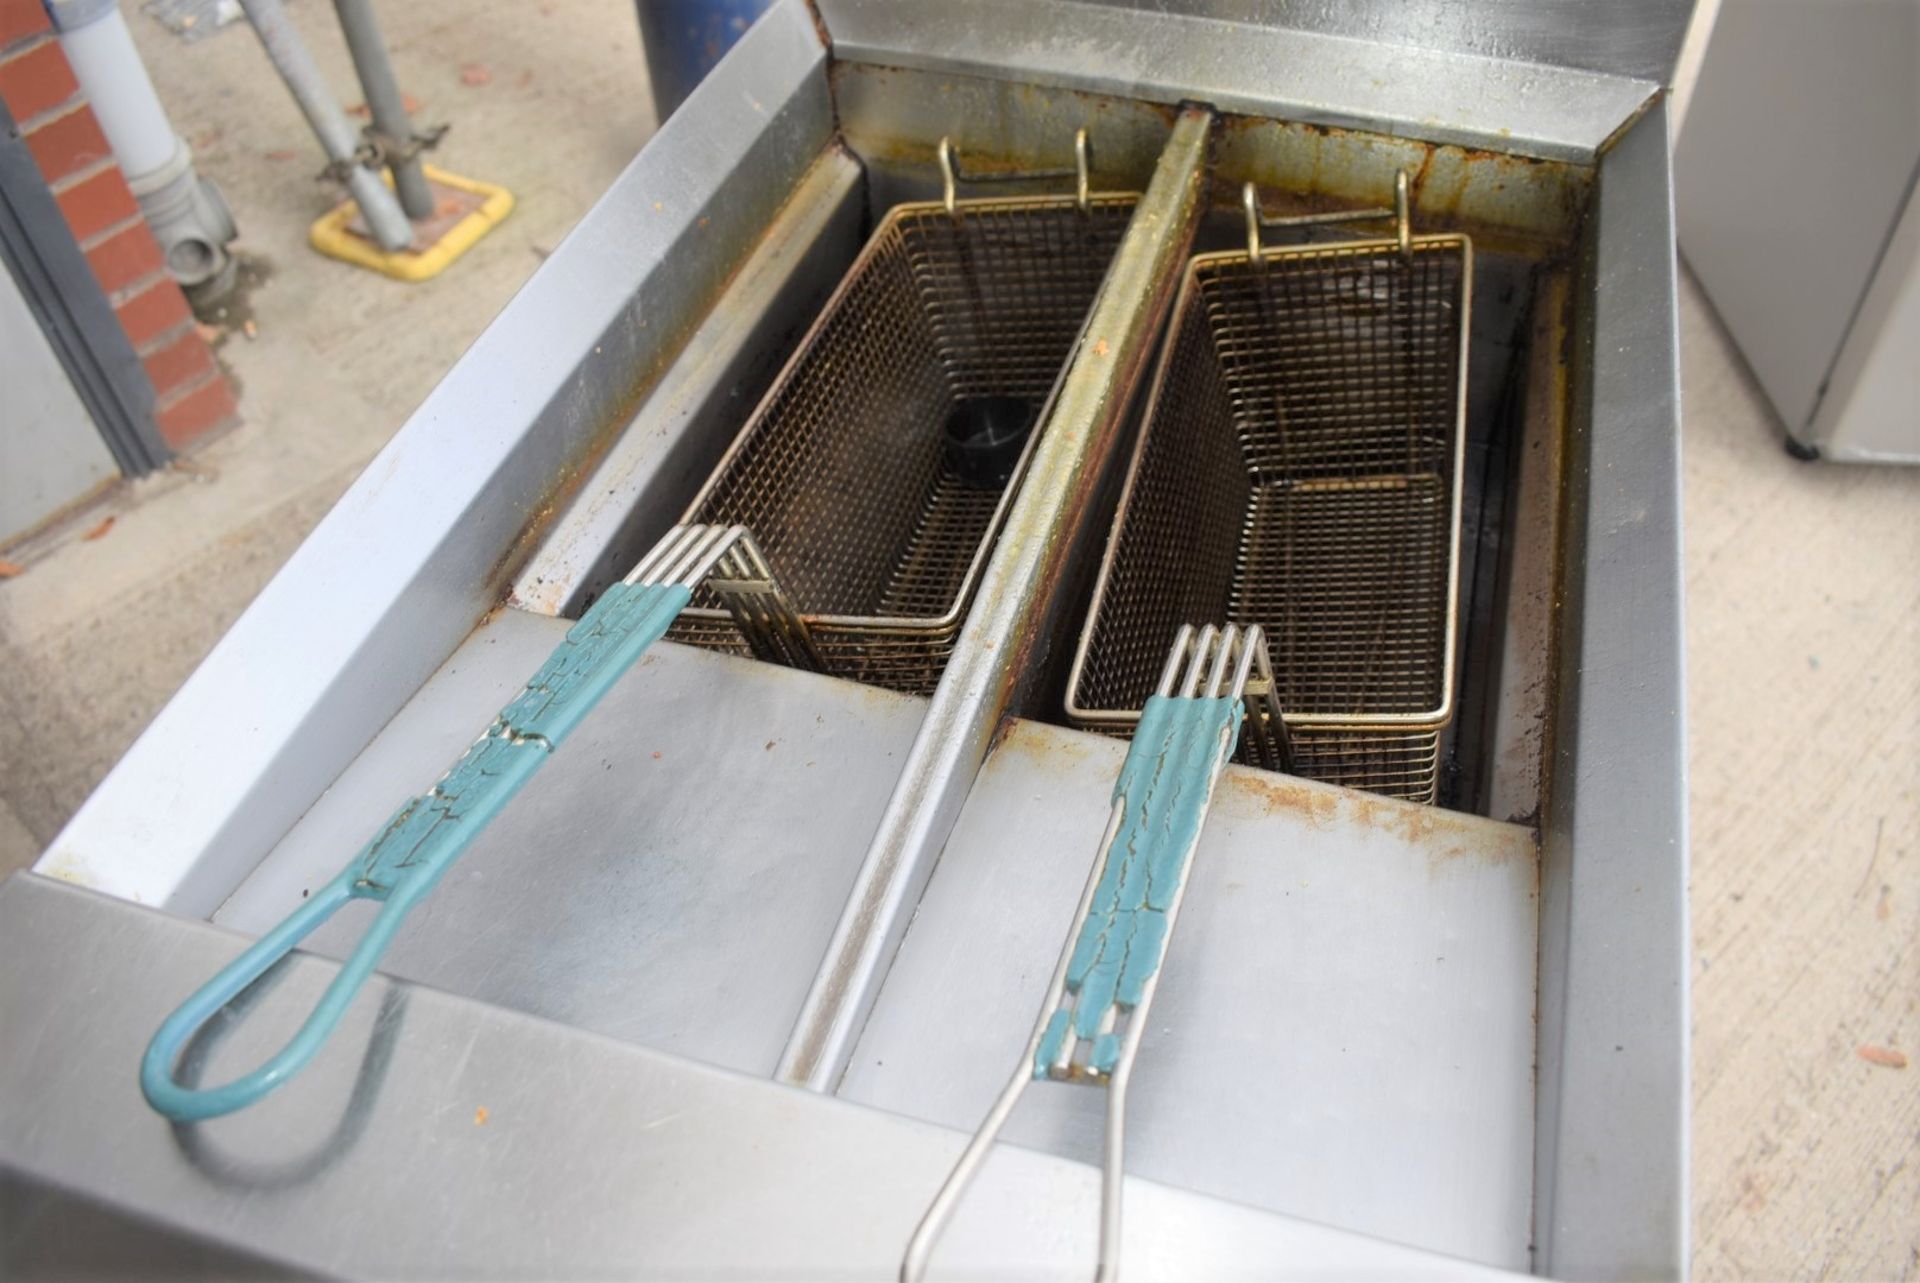 1 x Blue Seal Gas Fired Commercial Twin Tank Fryer With Baskets - Recently Removed From a Dark - Image 8 of 8